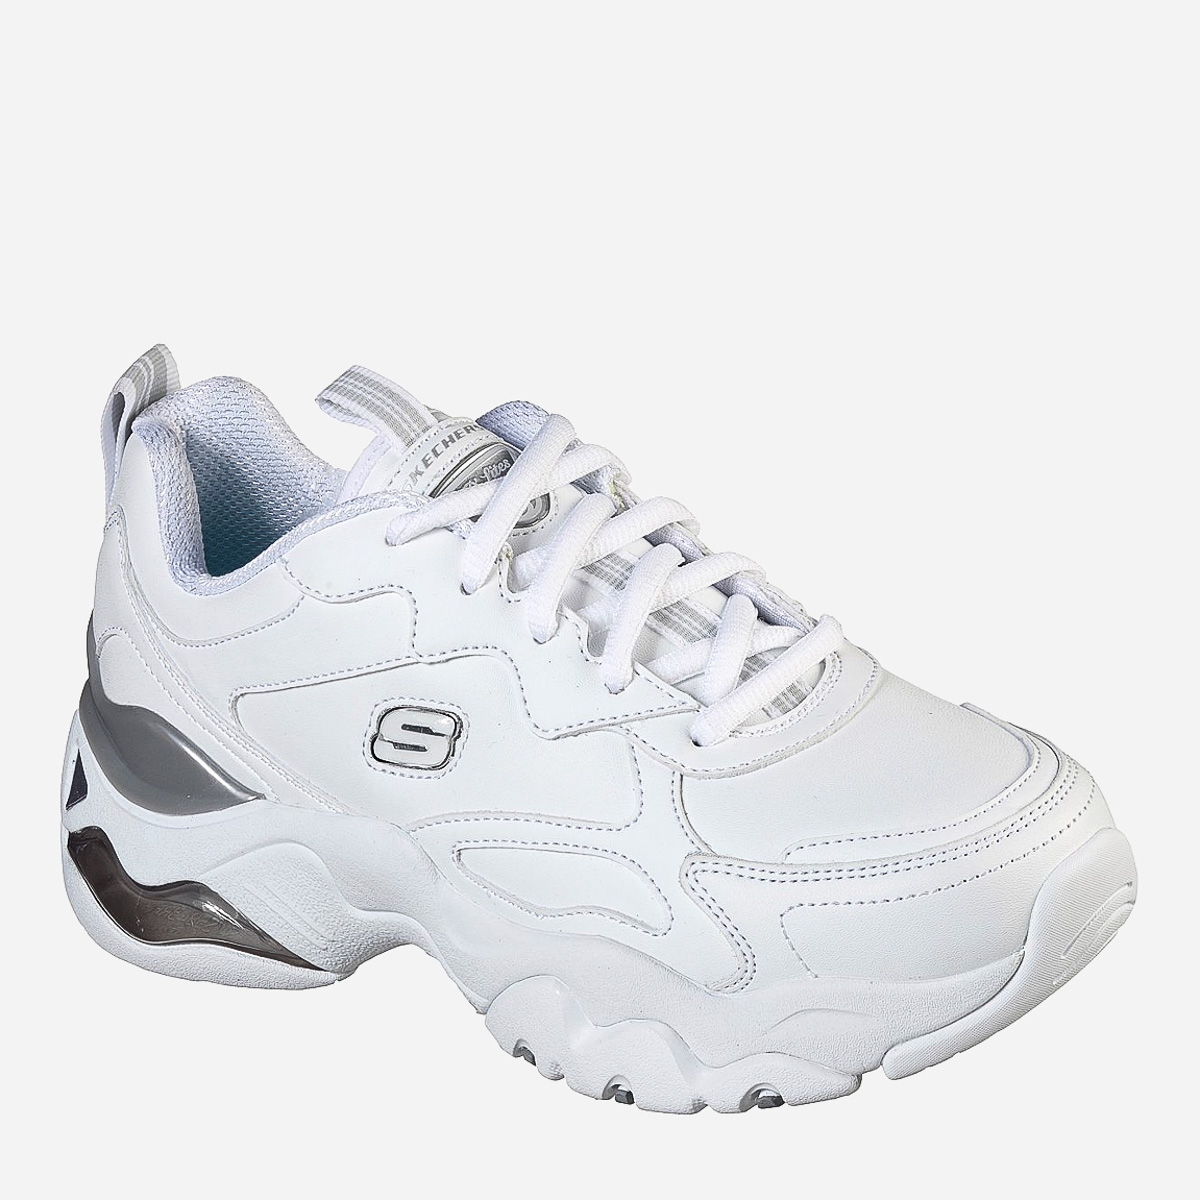 skechers shoes white